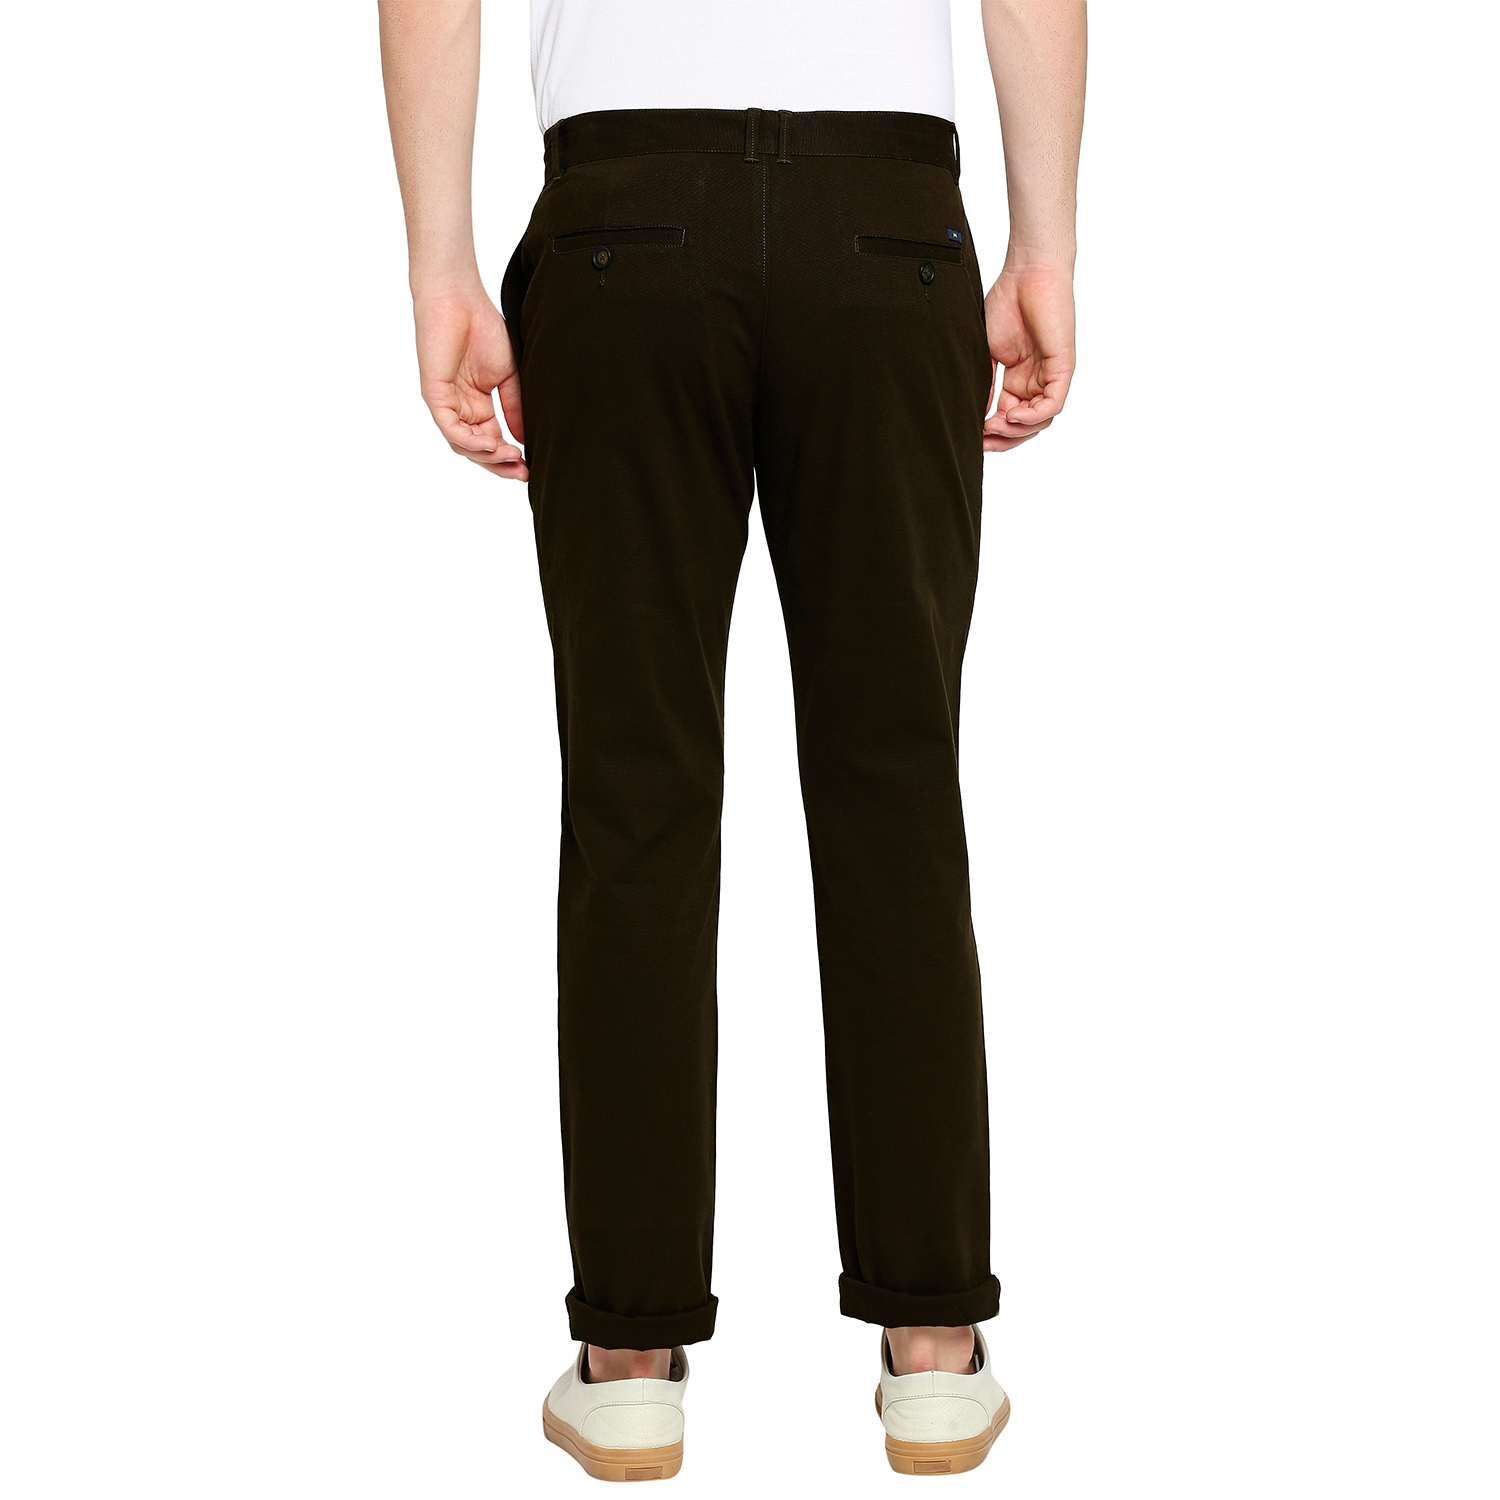 Basics | BASICS CASUAL PLAIN OLIVE COTTON STRETCH TAPERED TROUSERS  1